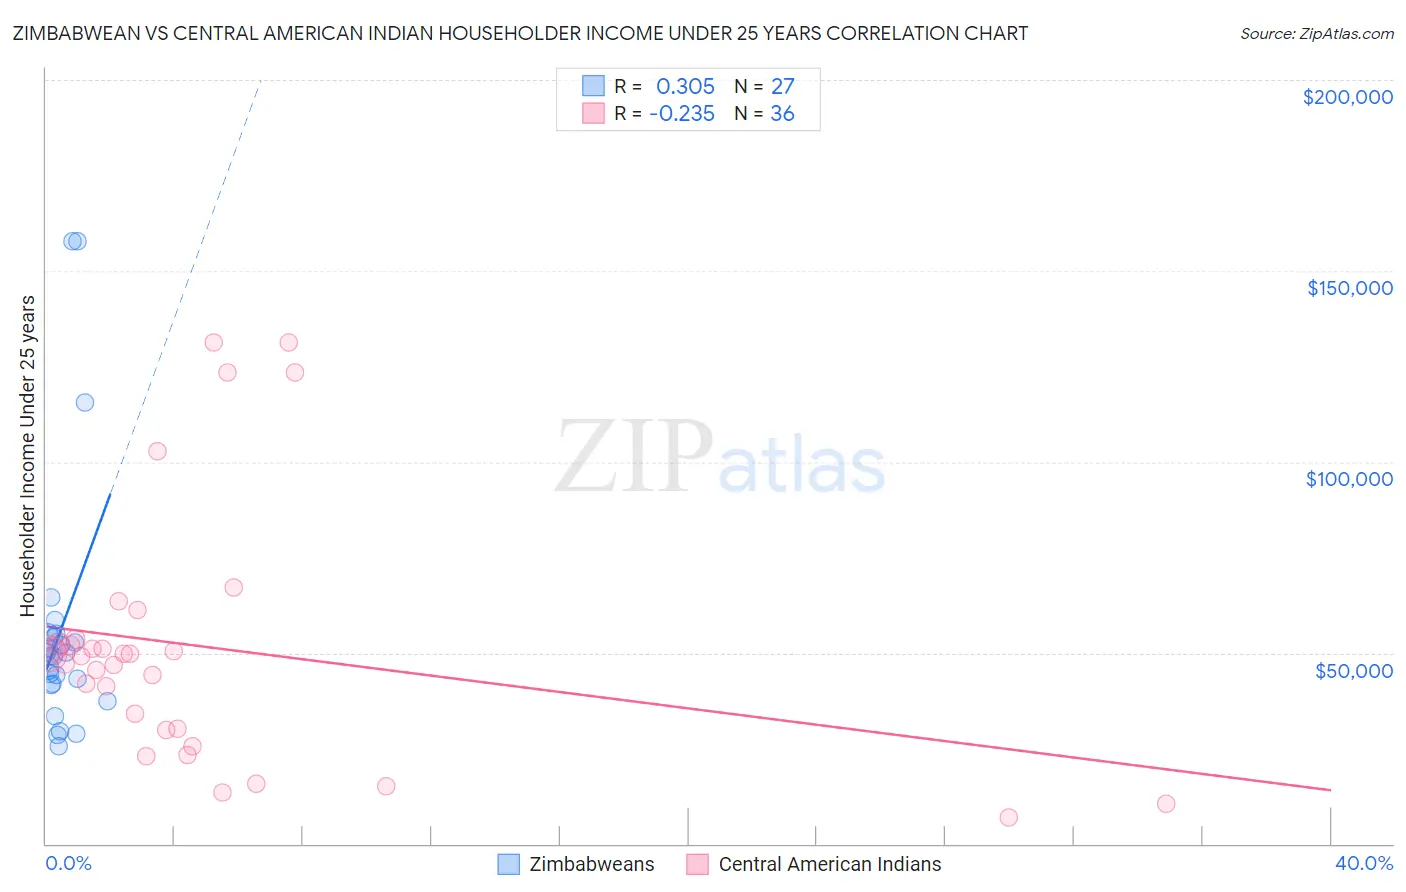 Zimbabwean vs Central American Indian Householder Income Under 25 years